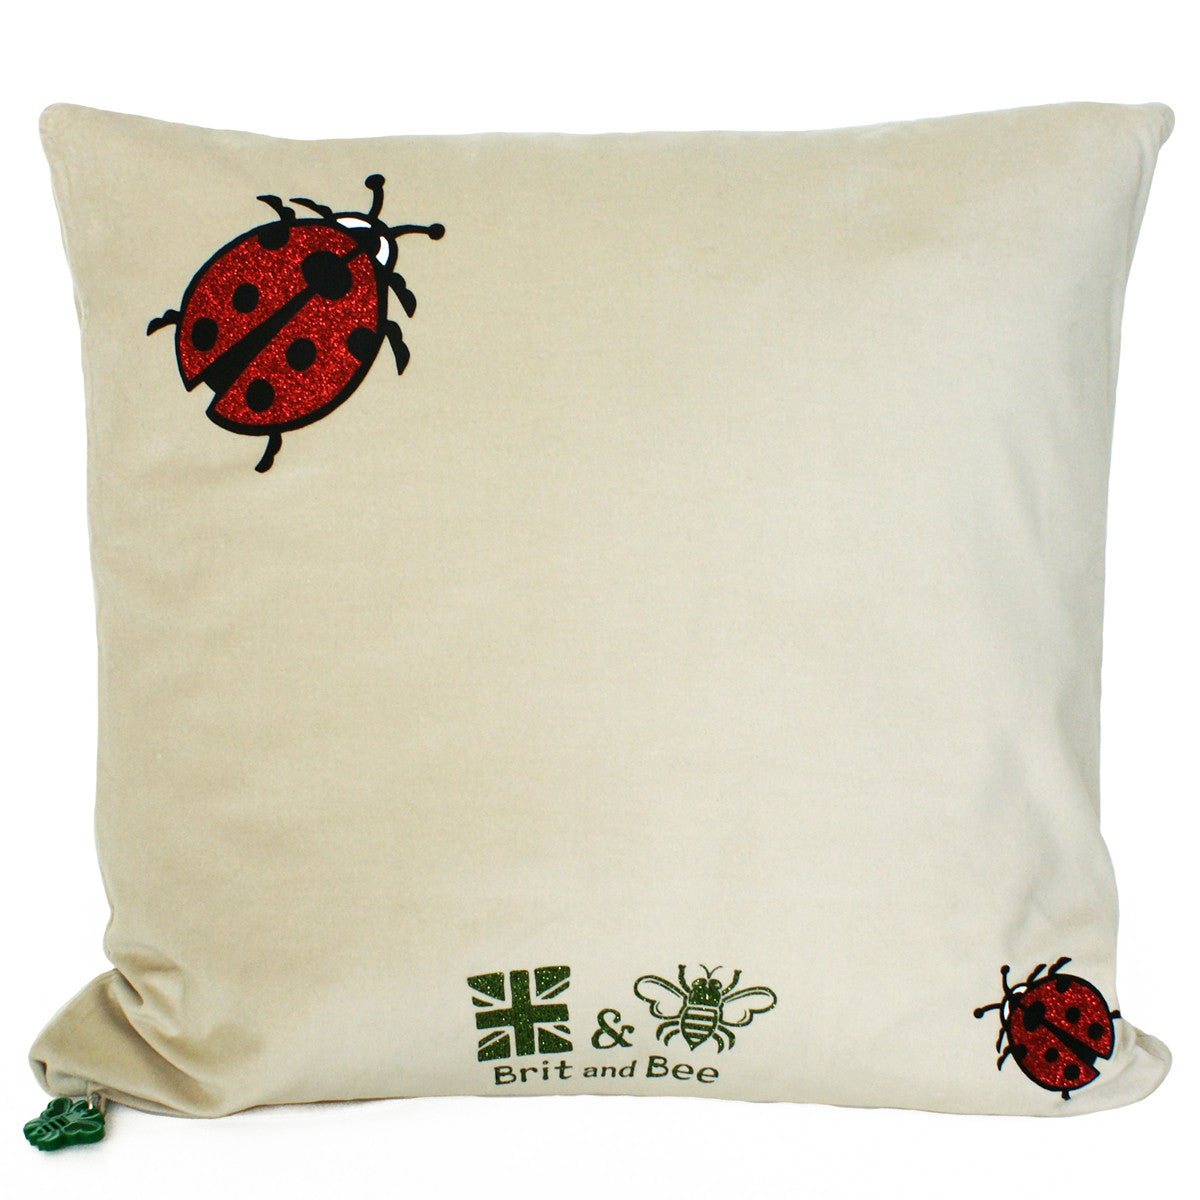 Brit and Bee Lillies and Ladybirds Throw Pillow BACK